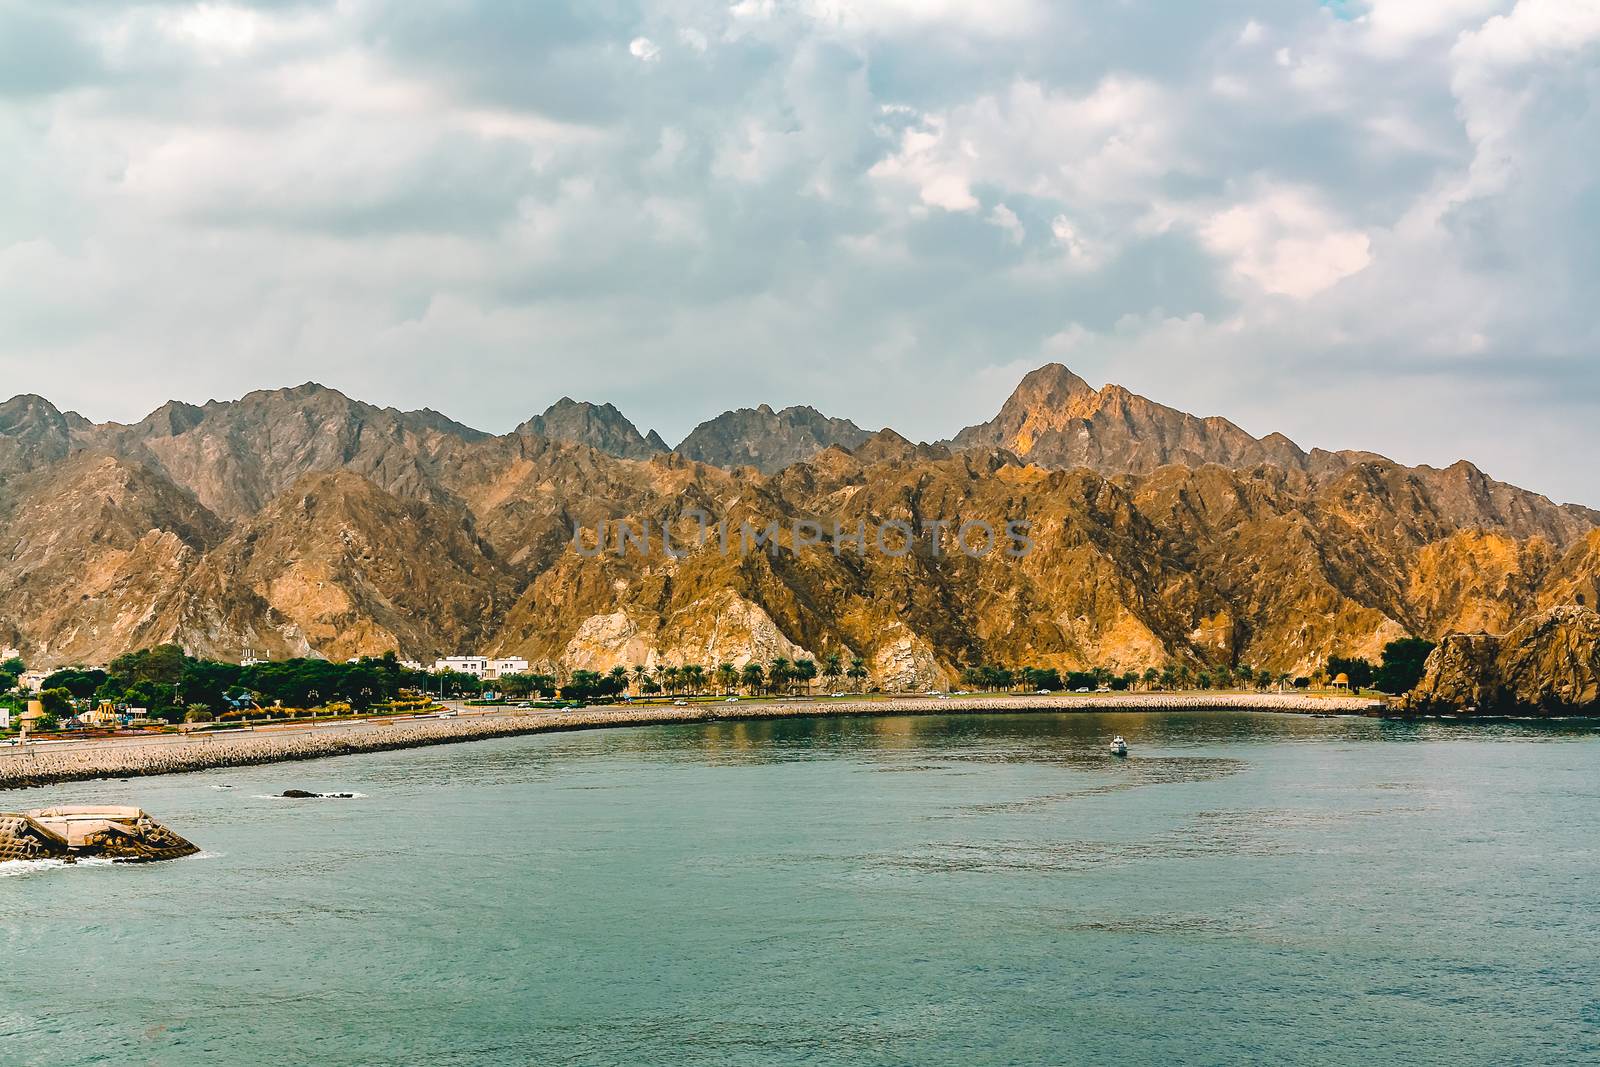 Coast of the Gulf of Oman near Muscat, view from the sea.